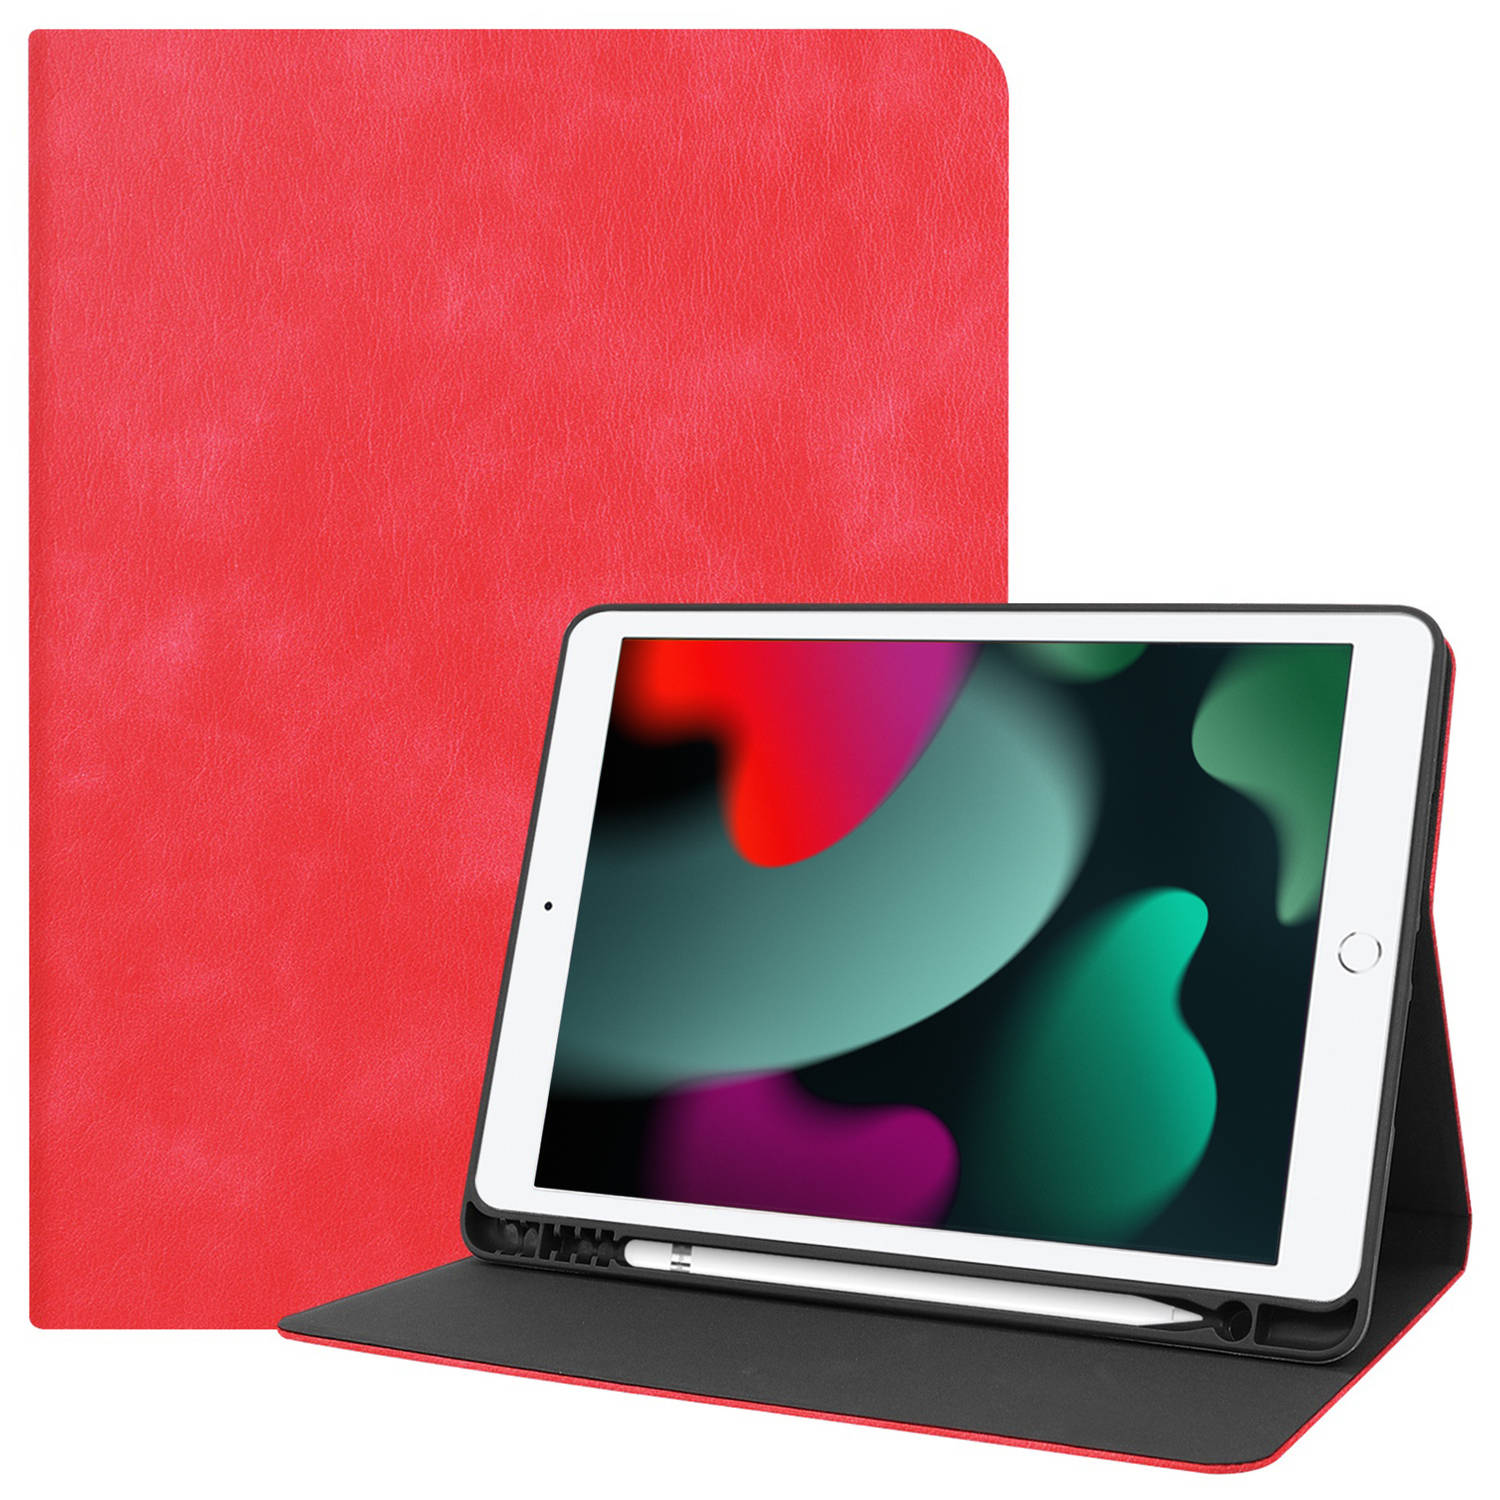 iPad 10.2 2020 Hoes Case Hoesje Hard Cover - iPad 10.2 2020 Hoesje Bookcase Met Uitsparing Apple Pencil - Rood